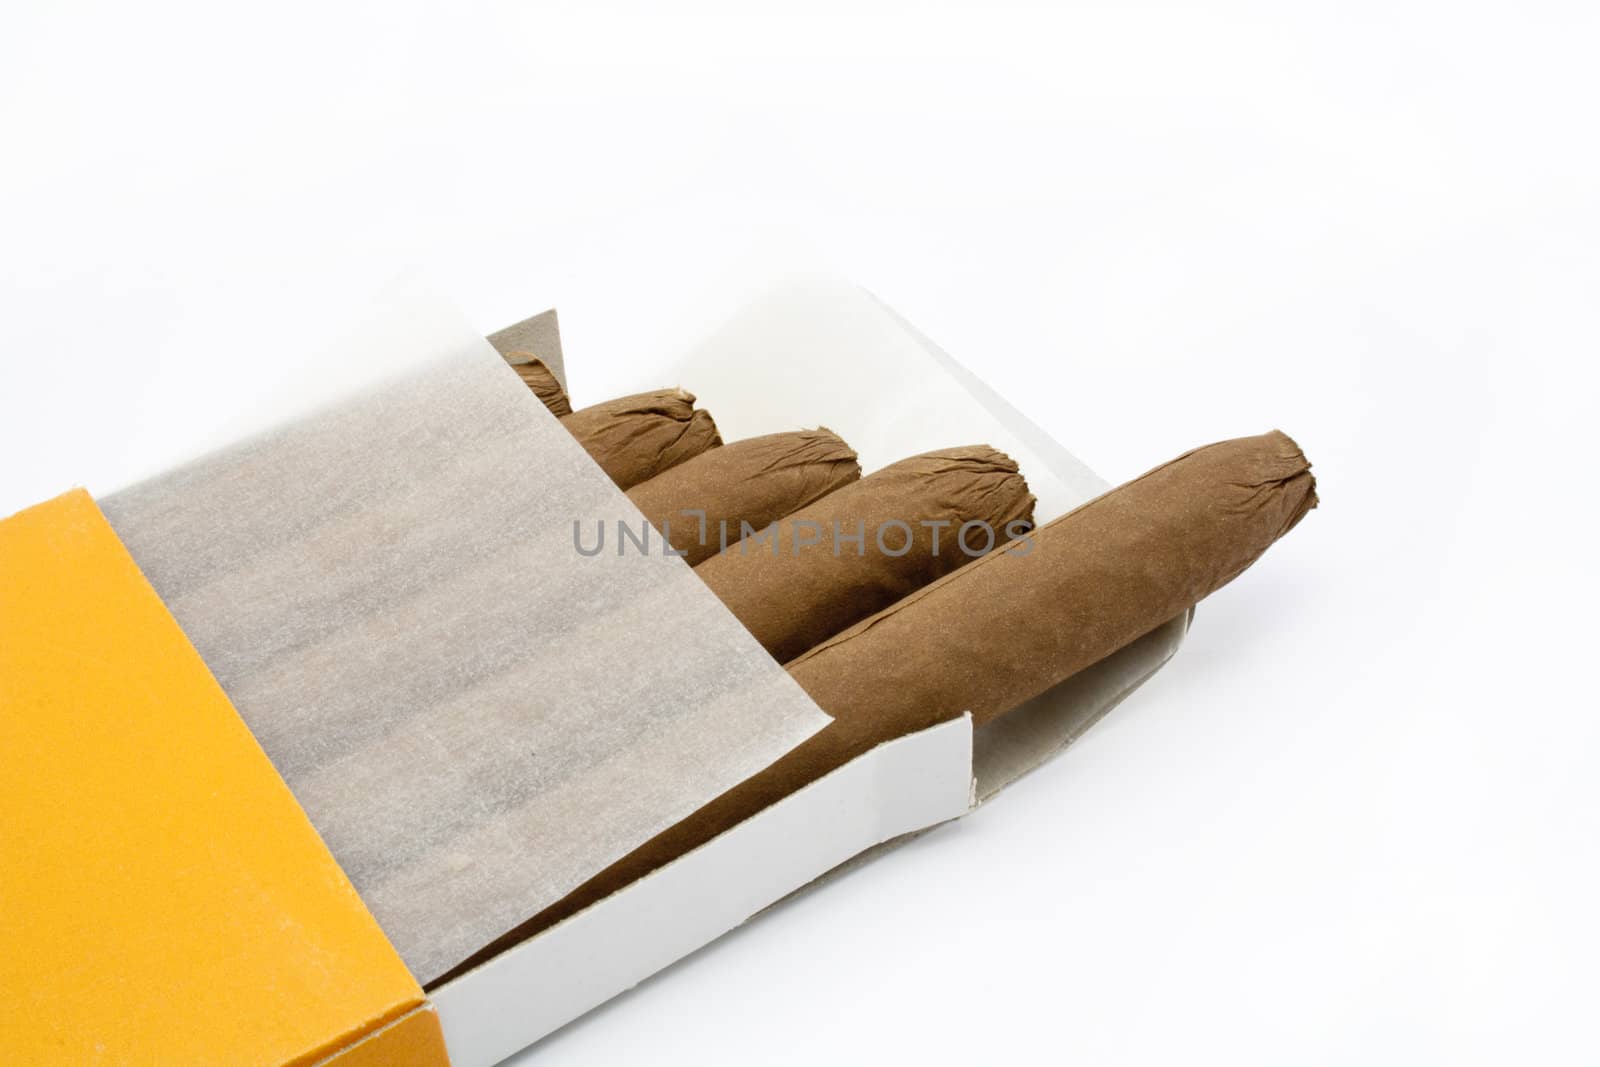 Cuban cigars by magraphics